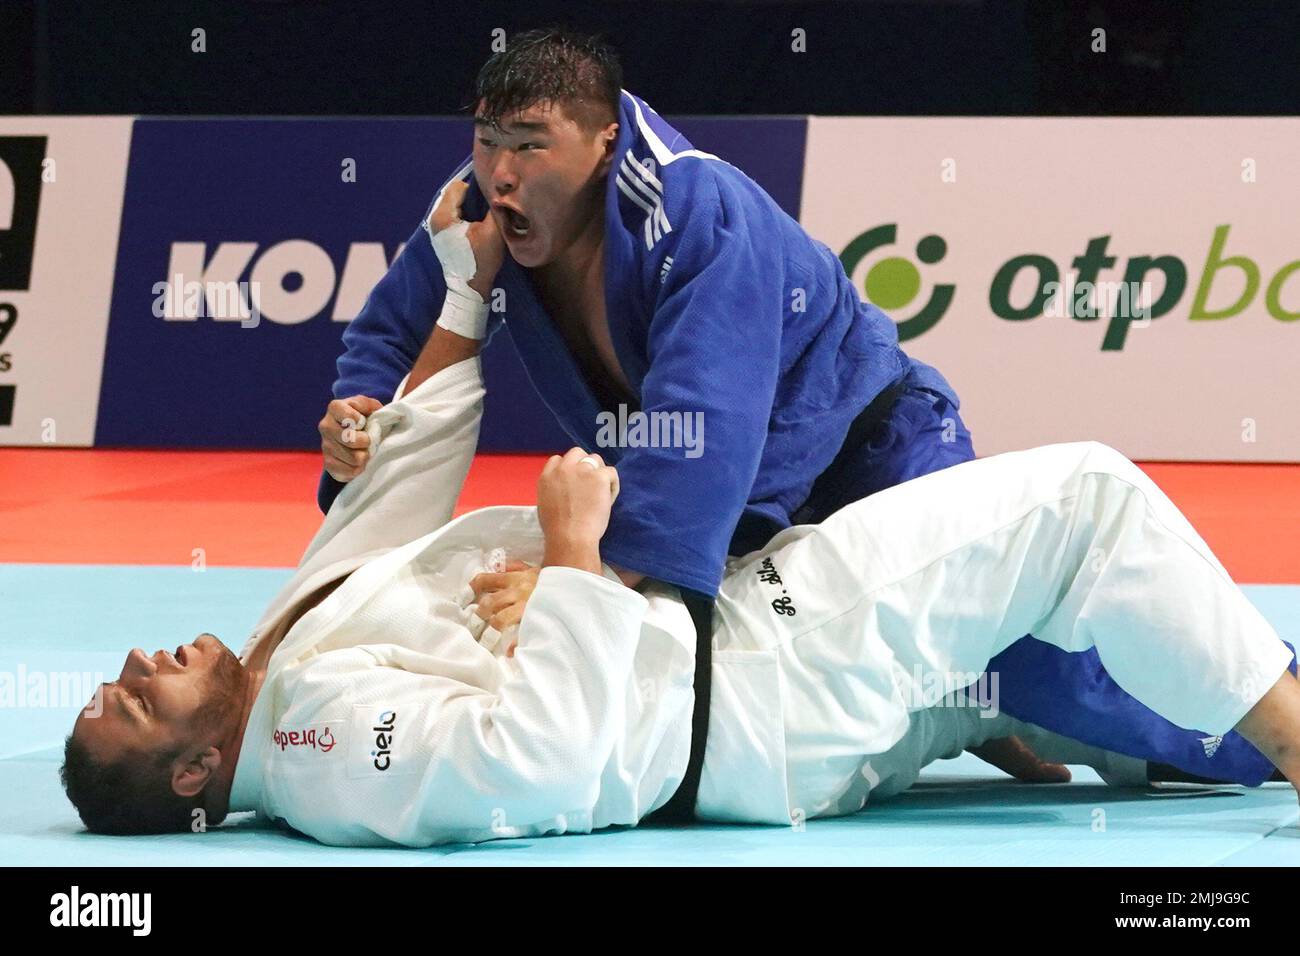 Kim Min-jung, top, of South Korea reacts after beating against Rafael Silva, bottom, of Brazil in the mens +100 kilogram bronze medal match of the World Judo Championships at Nippon Budokan martial